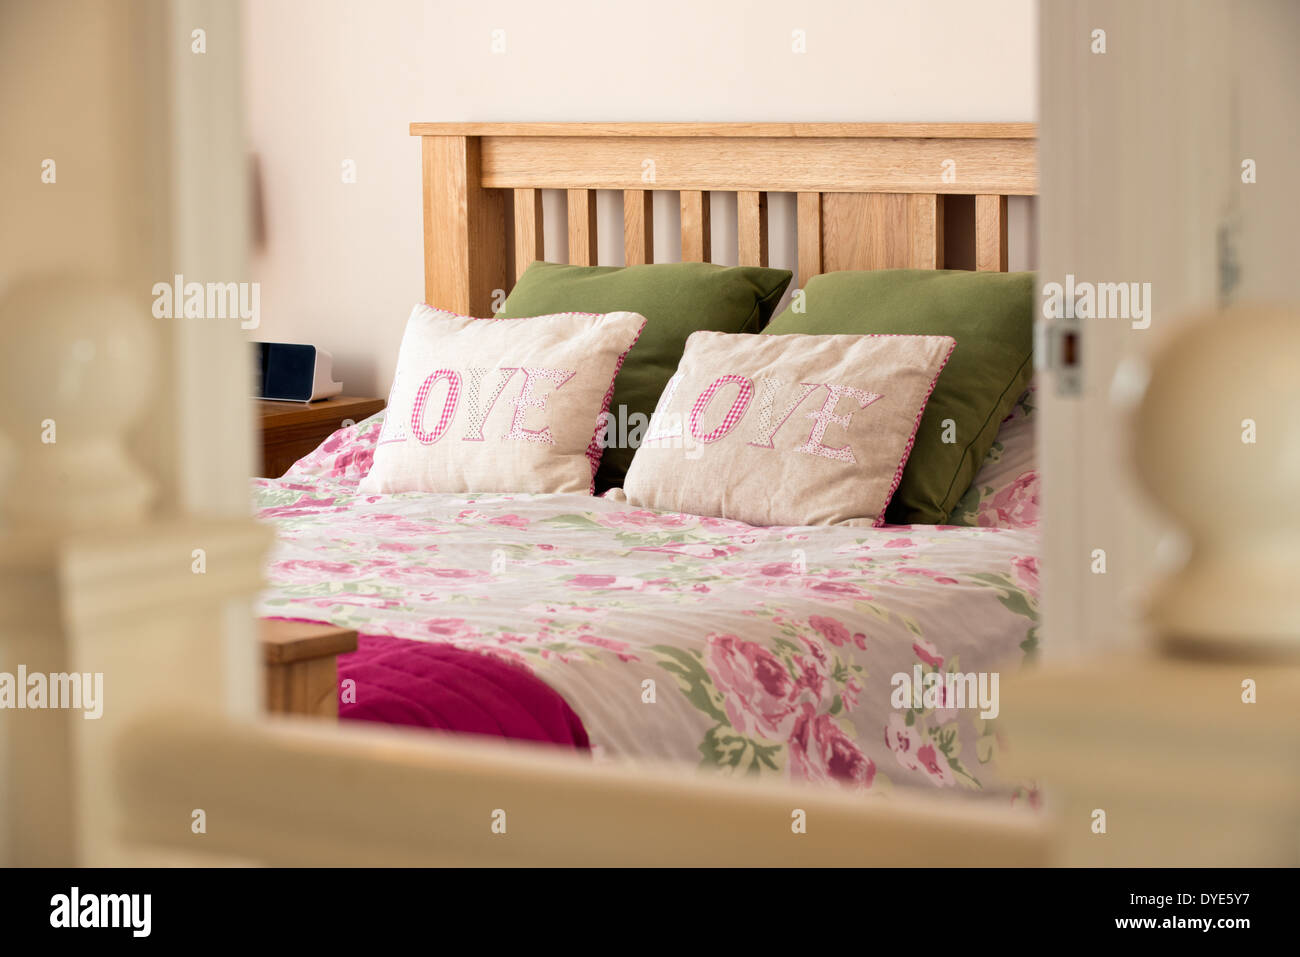 A lifestyle image of a bed in a homely bedroom with pillows with the word love embroidered upon them & a rose print bed cover Stock Photo